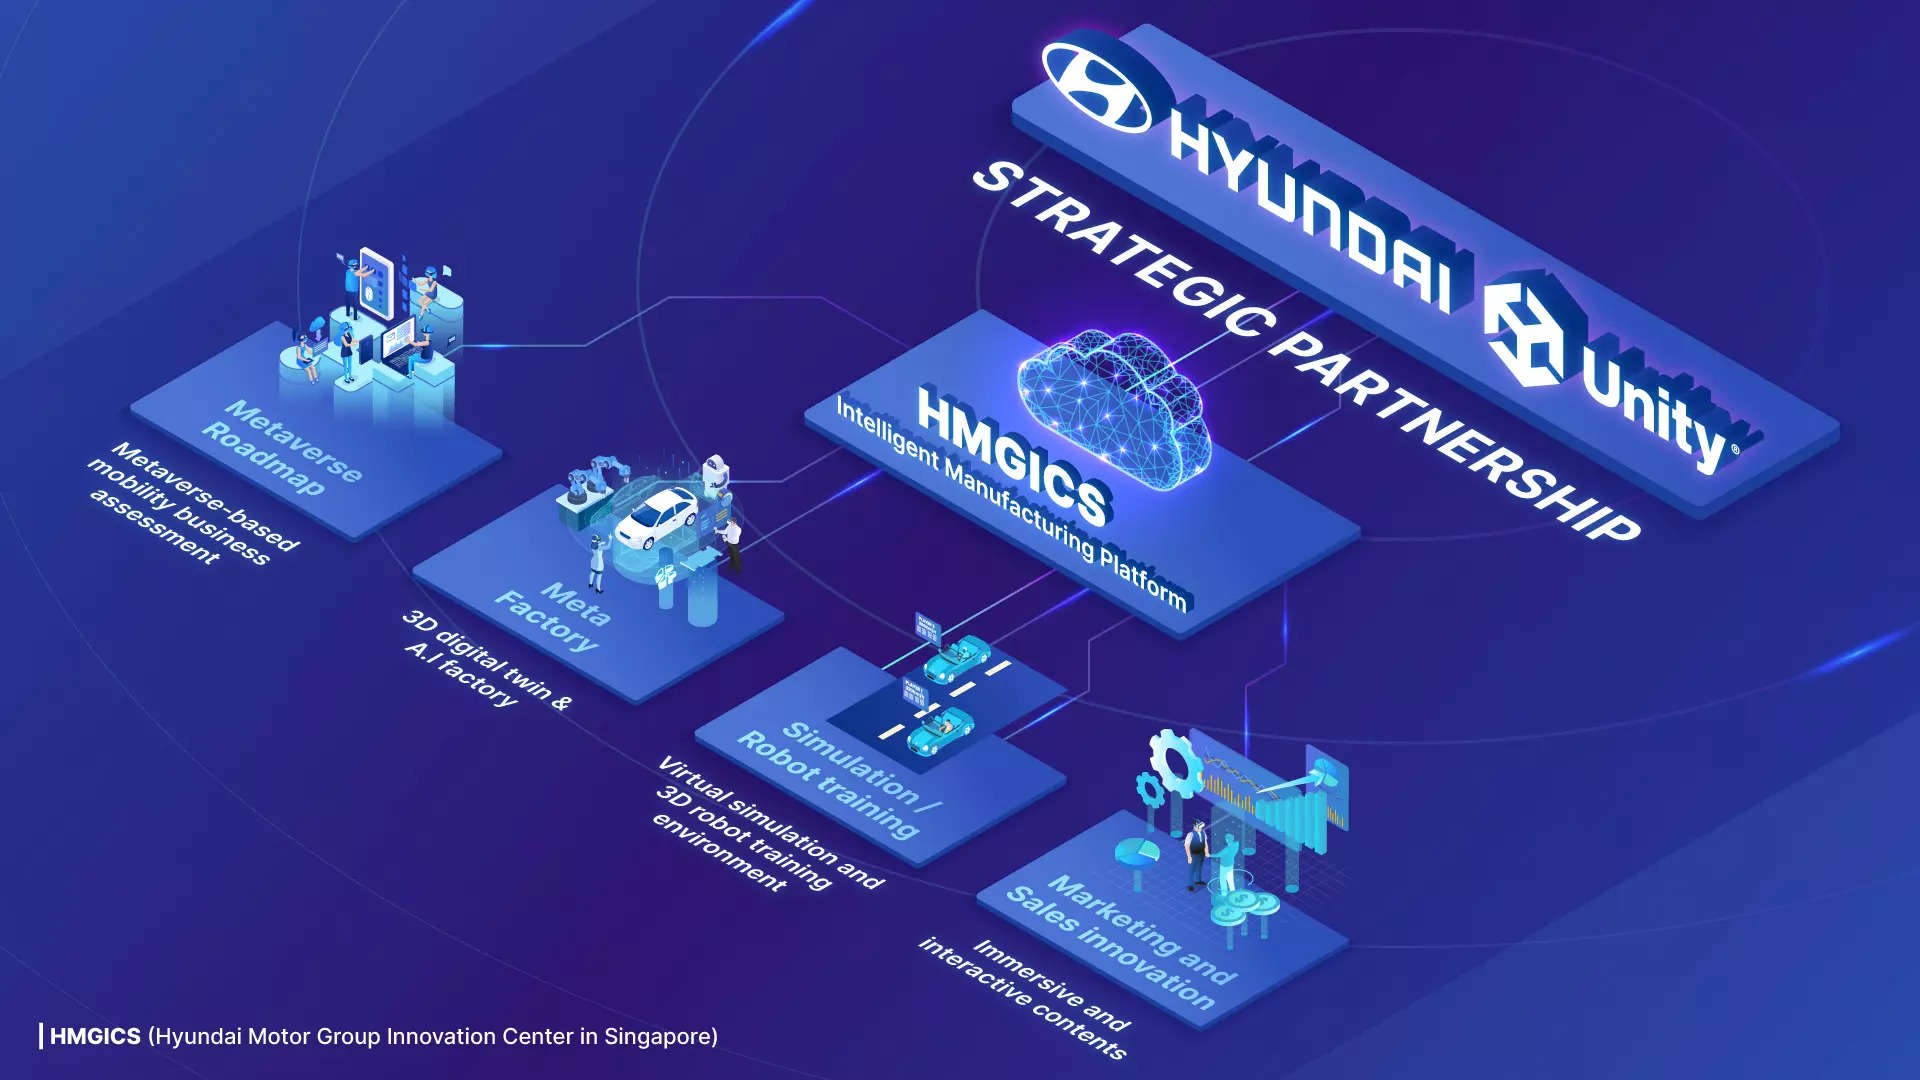  Beginning with the MOU, Hyundai and Unity will seek ways to expand the partnership in order to realize breakthrough innovations in metaverse-based digital twin factories, while also expanding collaboration in the fields of AI training and study as well as autonomous driving simulation. 